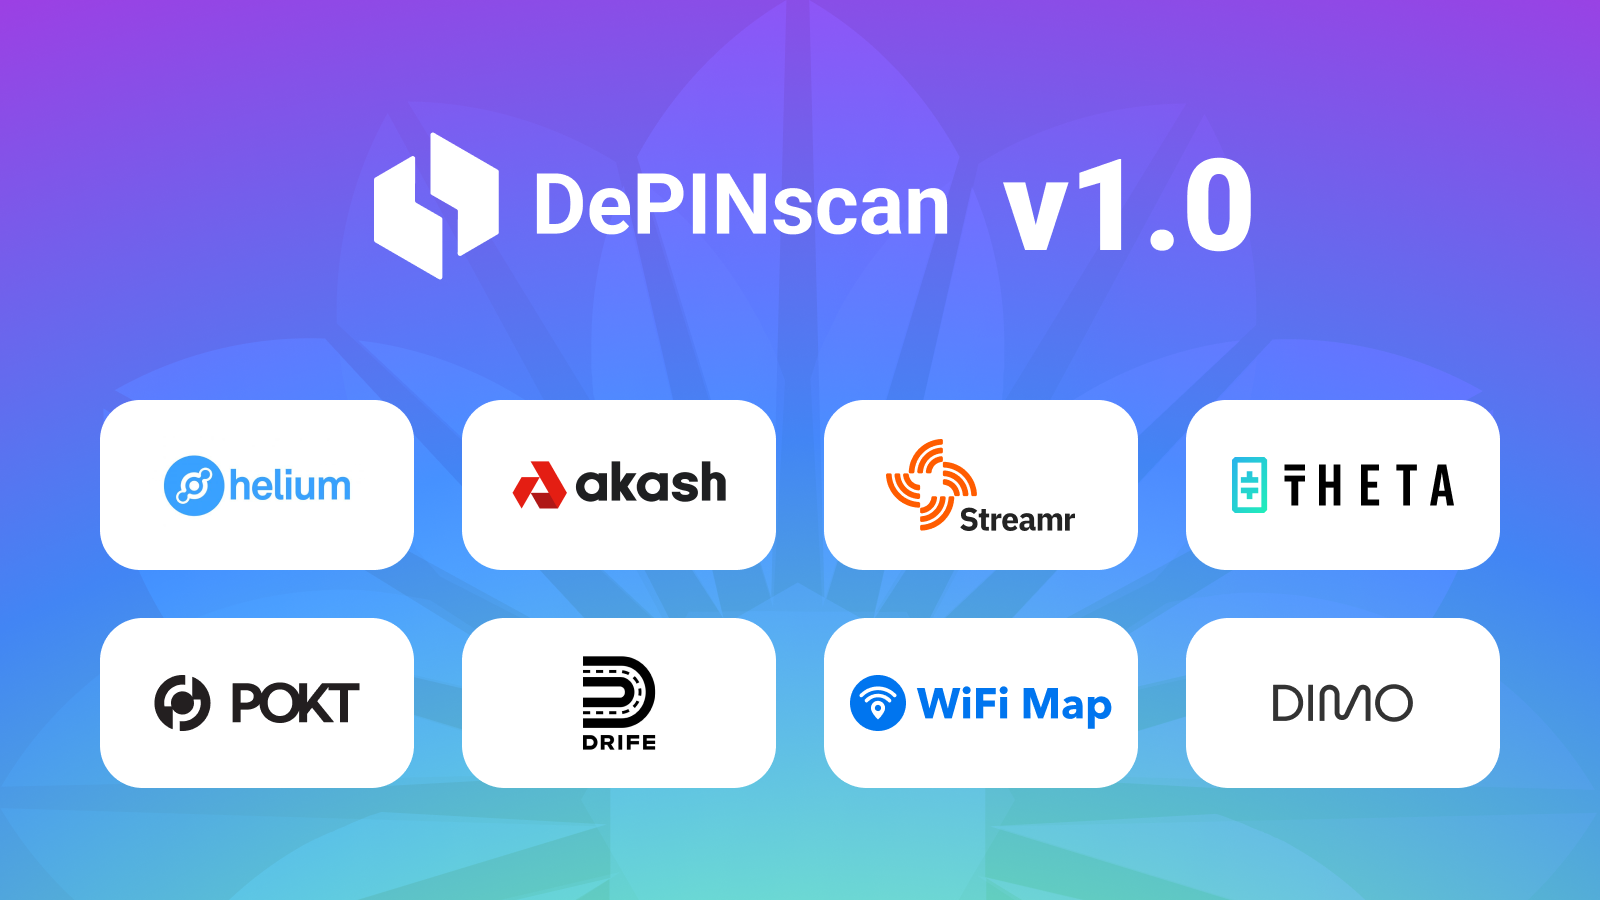 DePINscan 1.0 Launches with Partnership from Helium, Akash, Streamr, Theta, and more cover